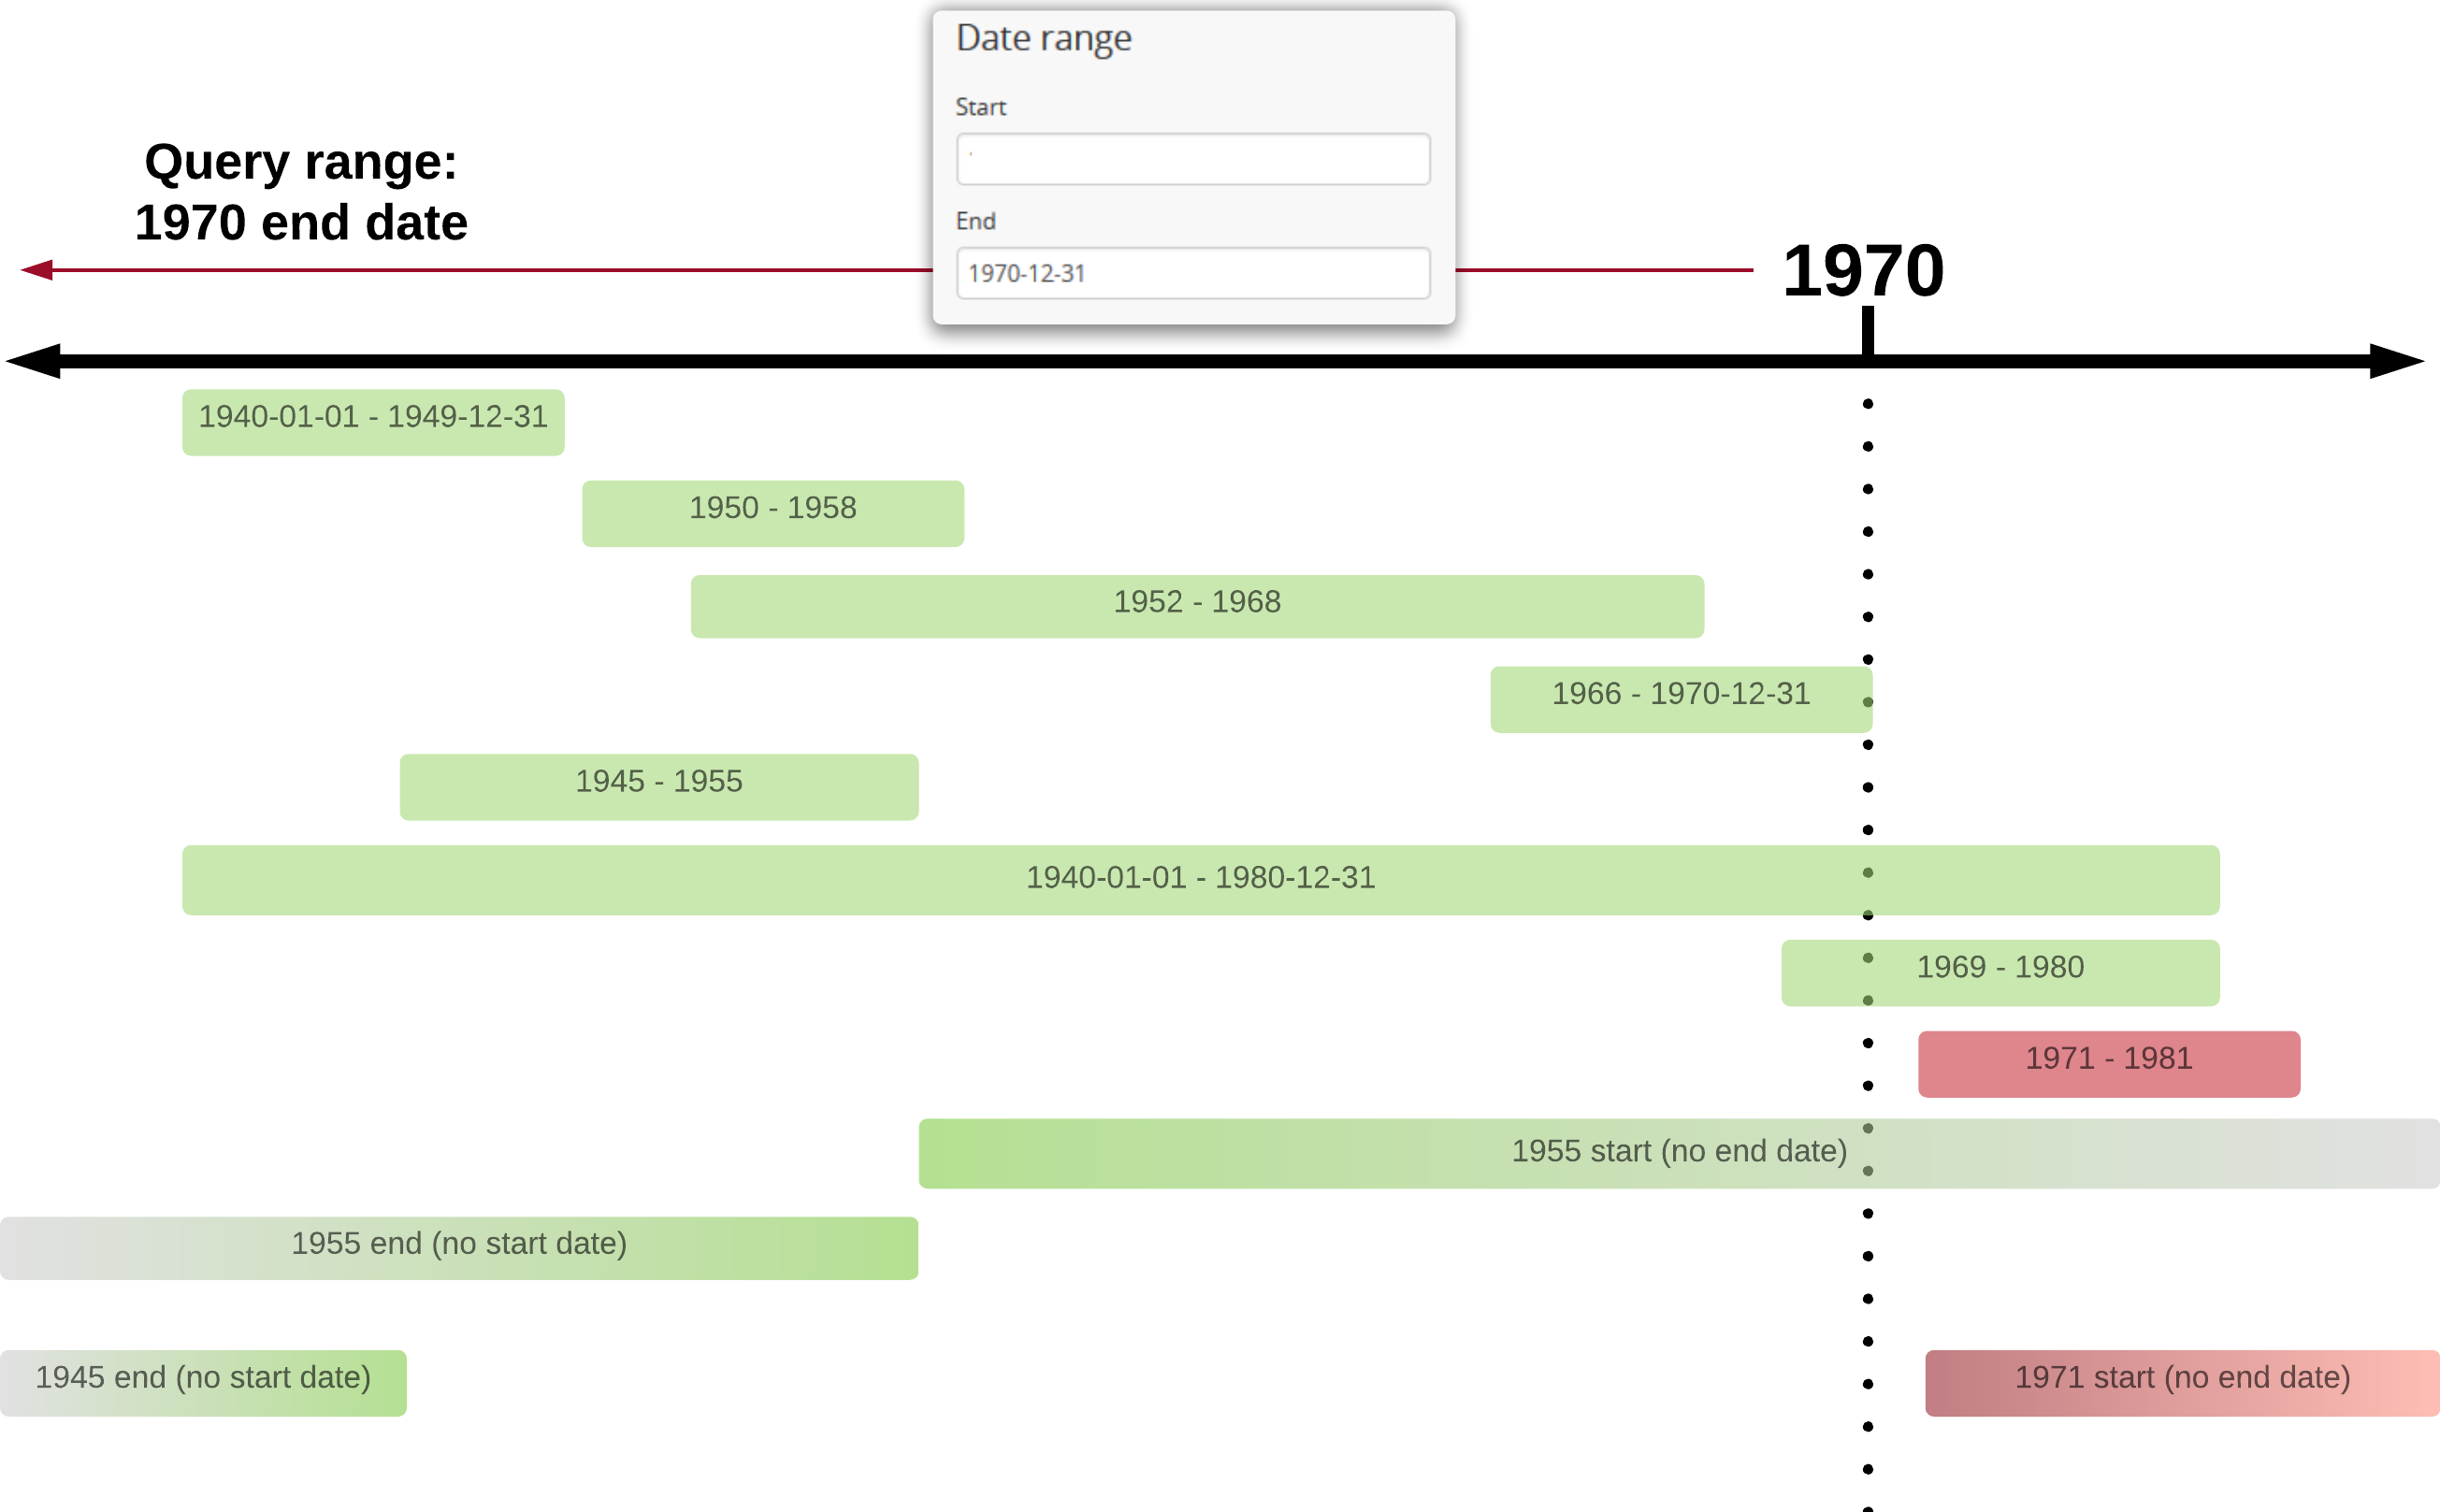 An example of results returned for a 1970 end date query with the Overlap option used